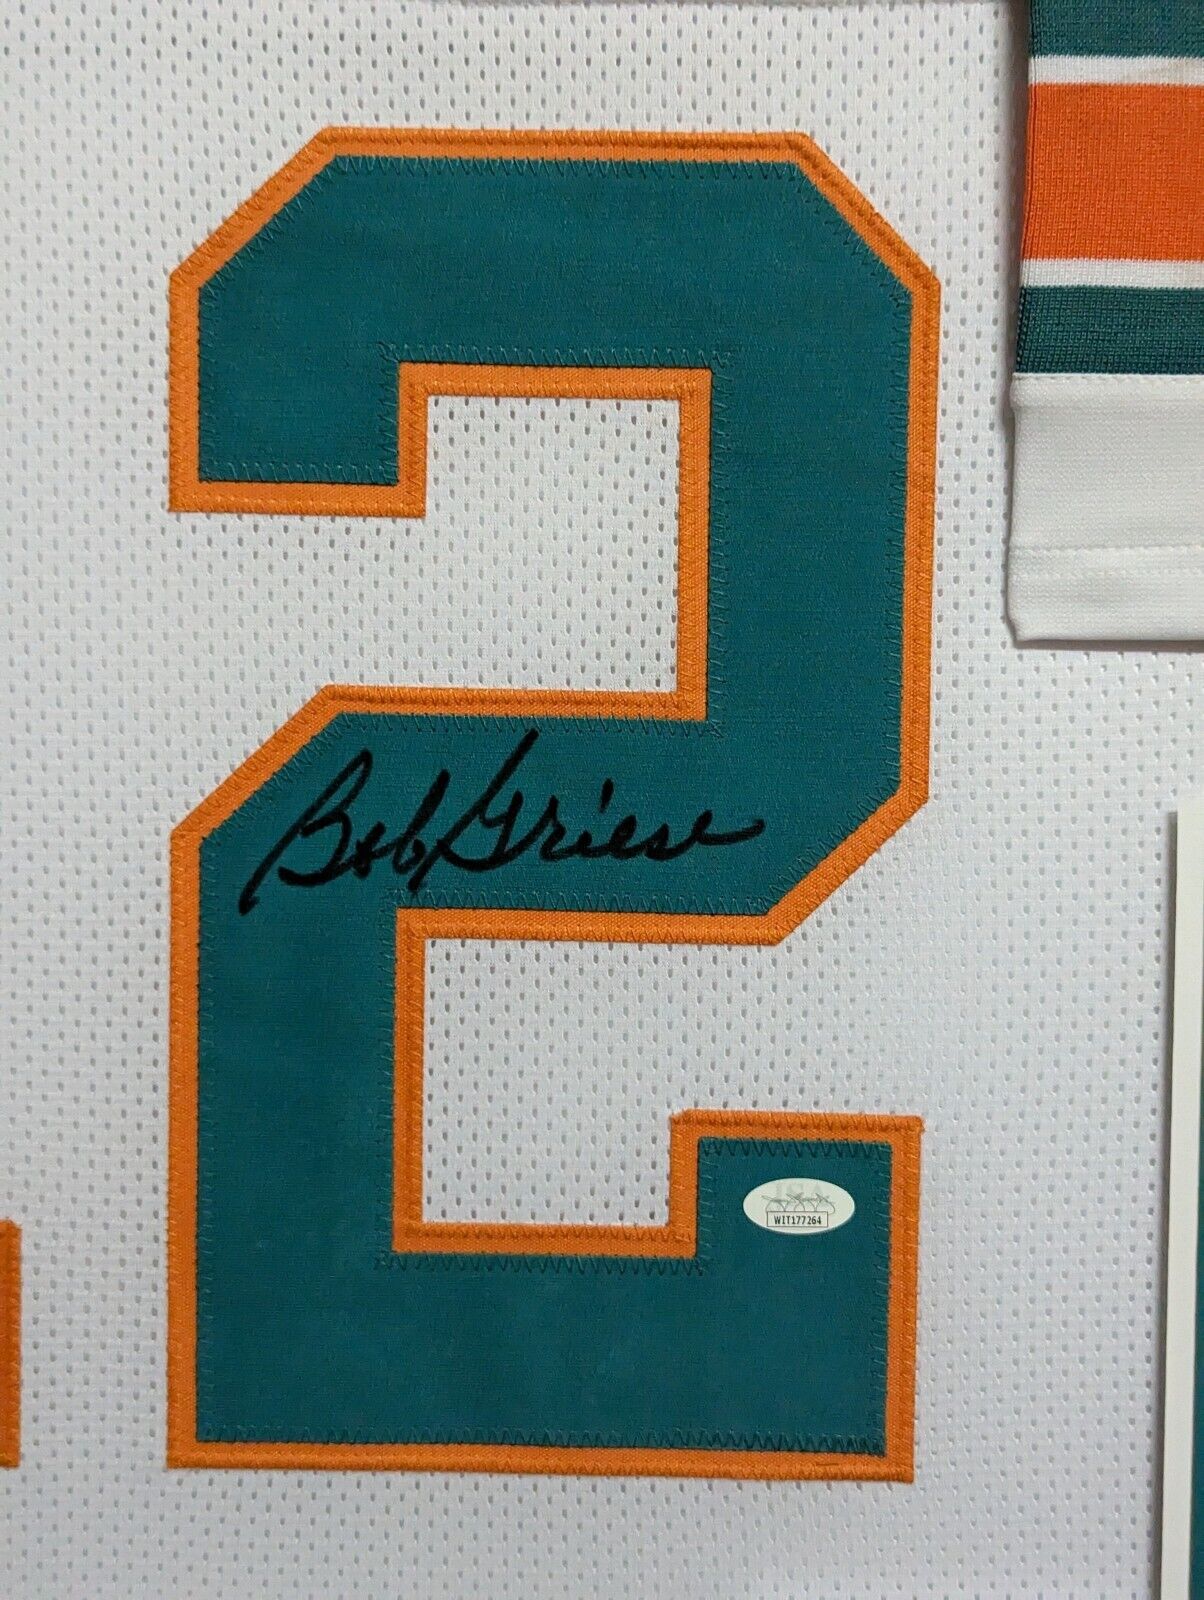 MVP Authentics Framed Miami Dolphins Bob Griese Autographed Signed Jersey Jsa Coa 360 sports jersey framing , jersey framing